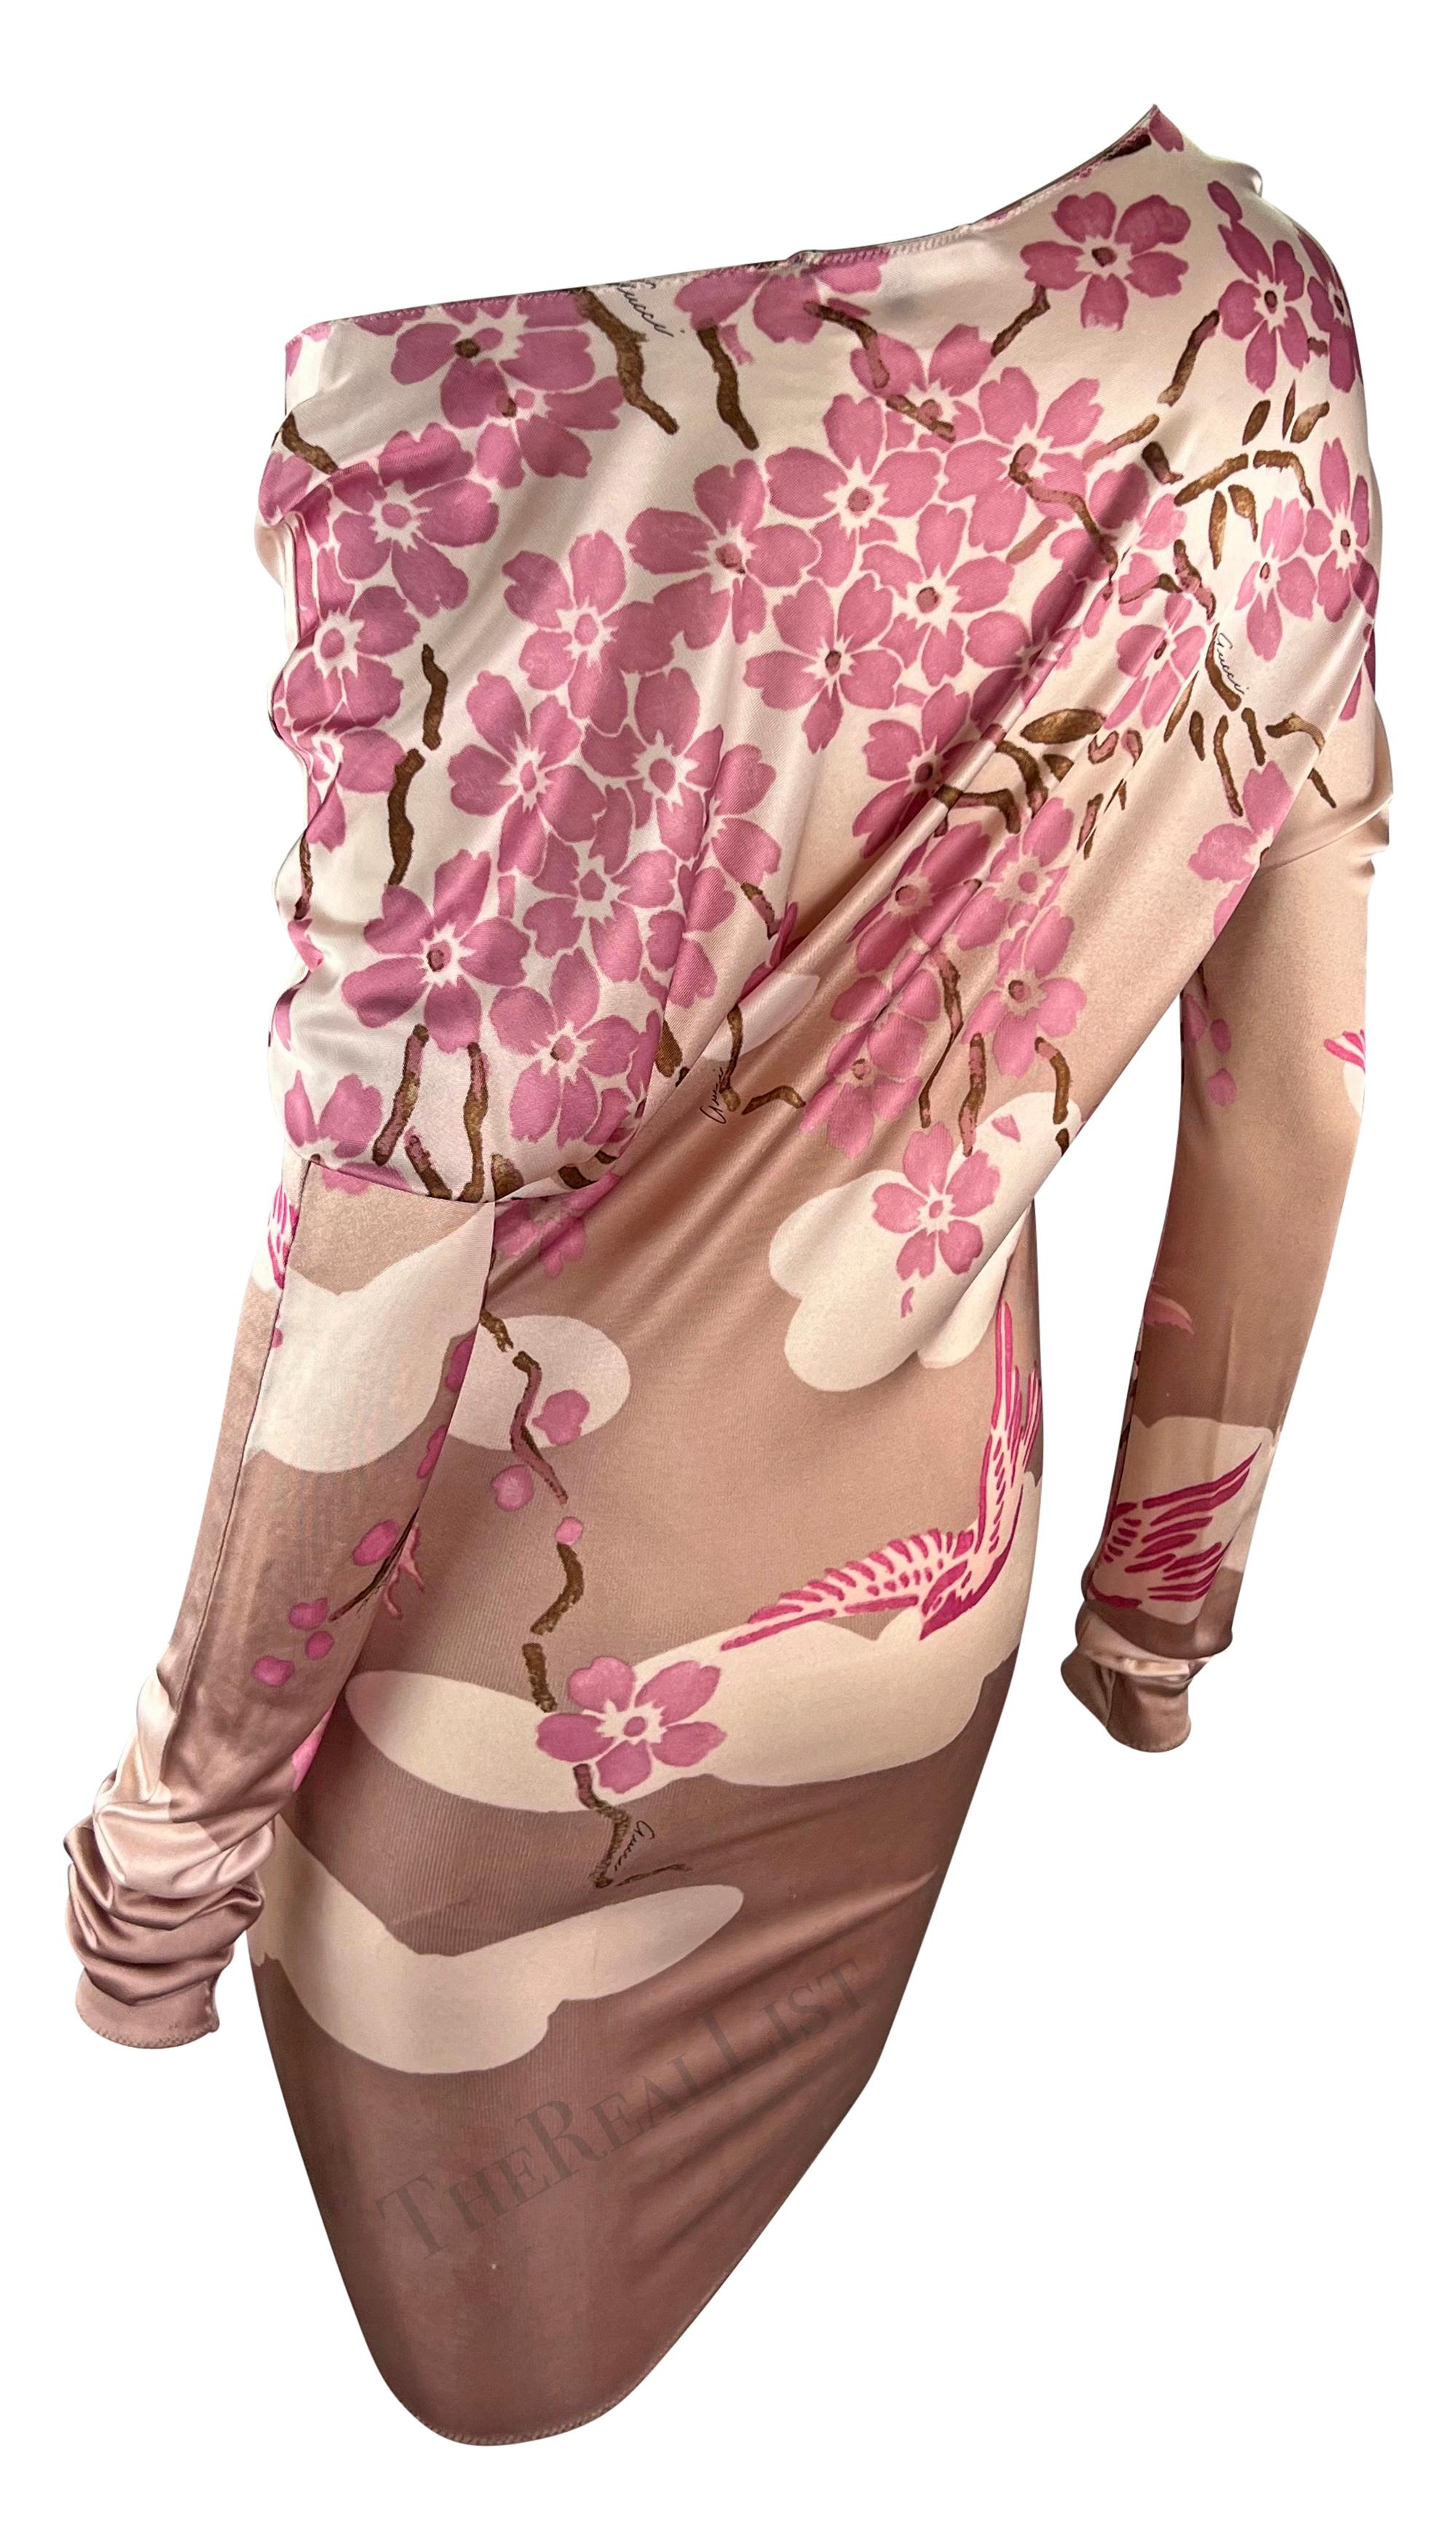 S/S 2003 Gucci by Tom Ford Pink Cherry Blossom Runway Mini Dress  For Sale 3